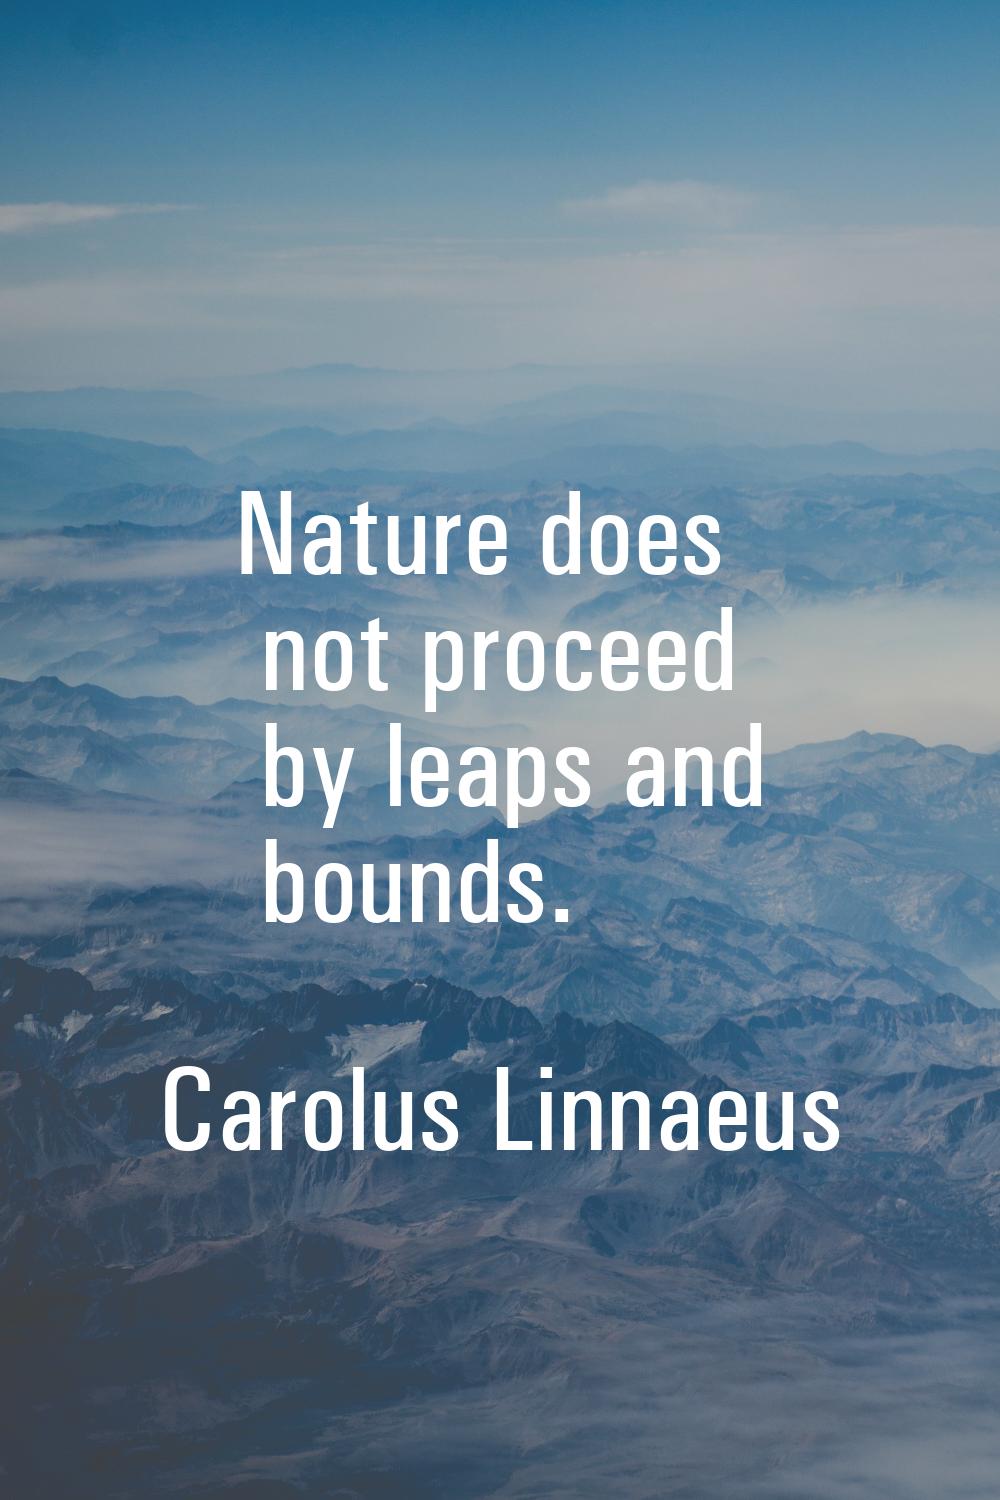 Nature does not proceed by leaps and bounds.